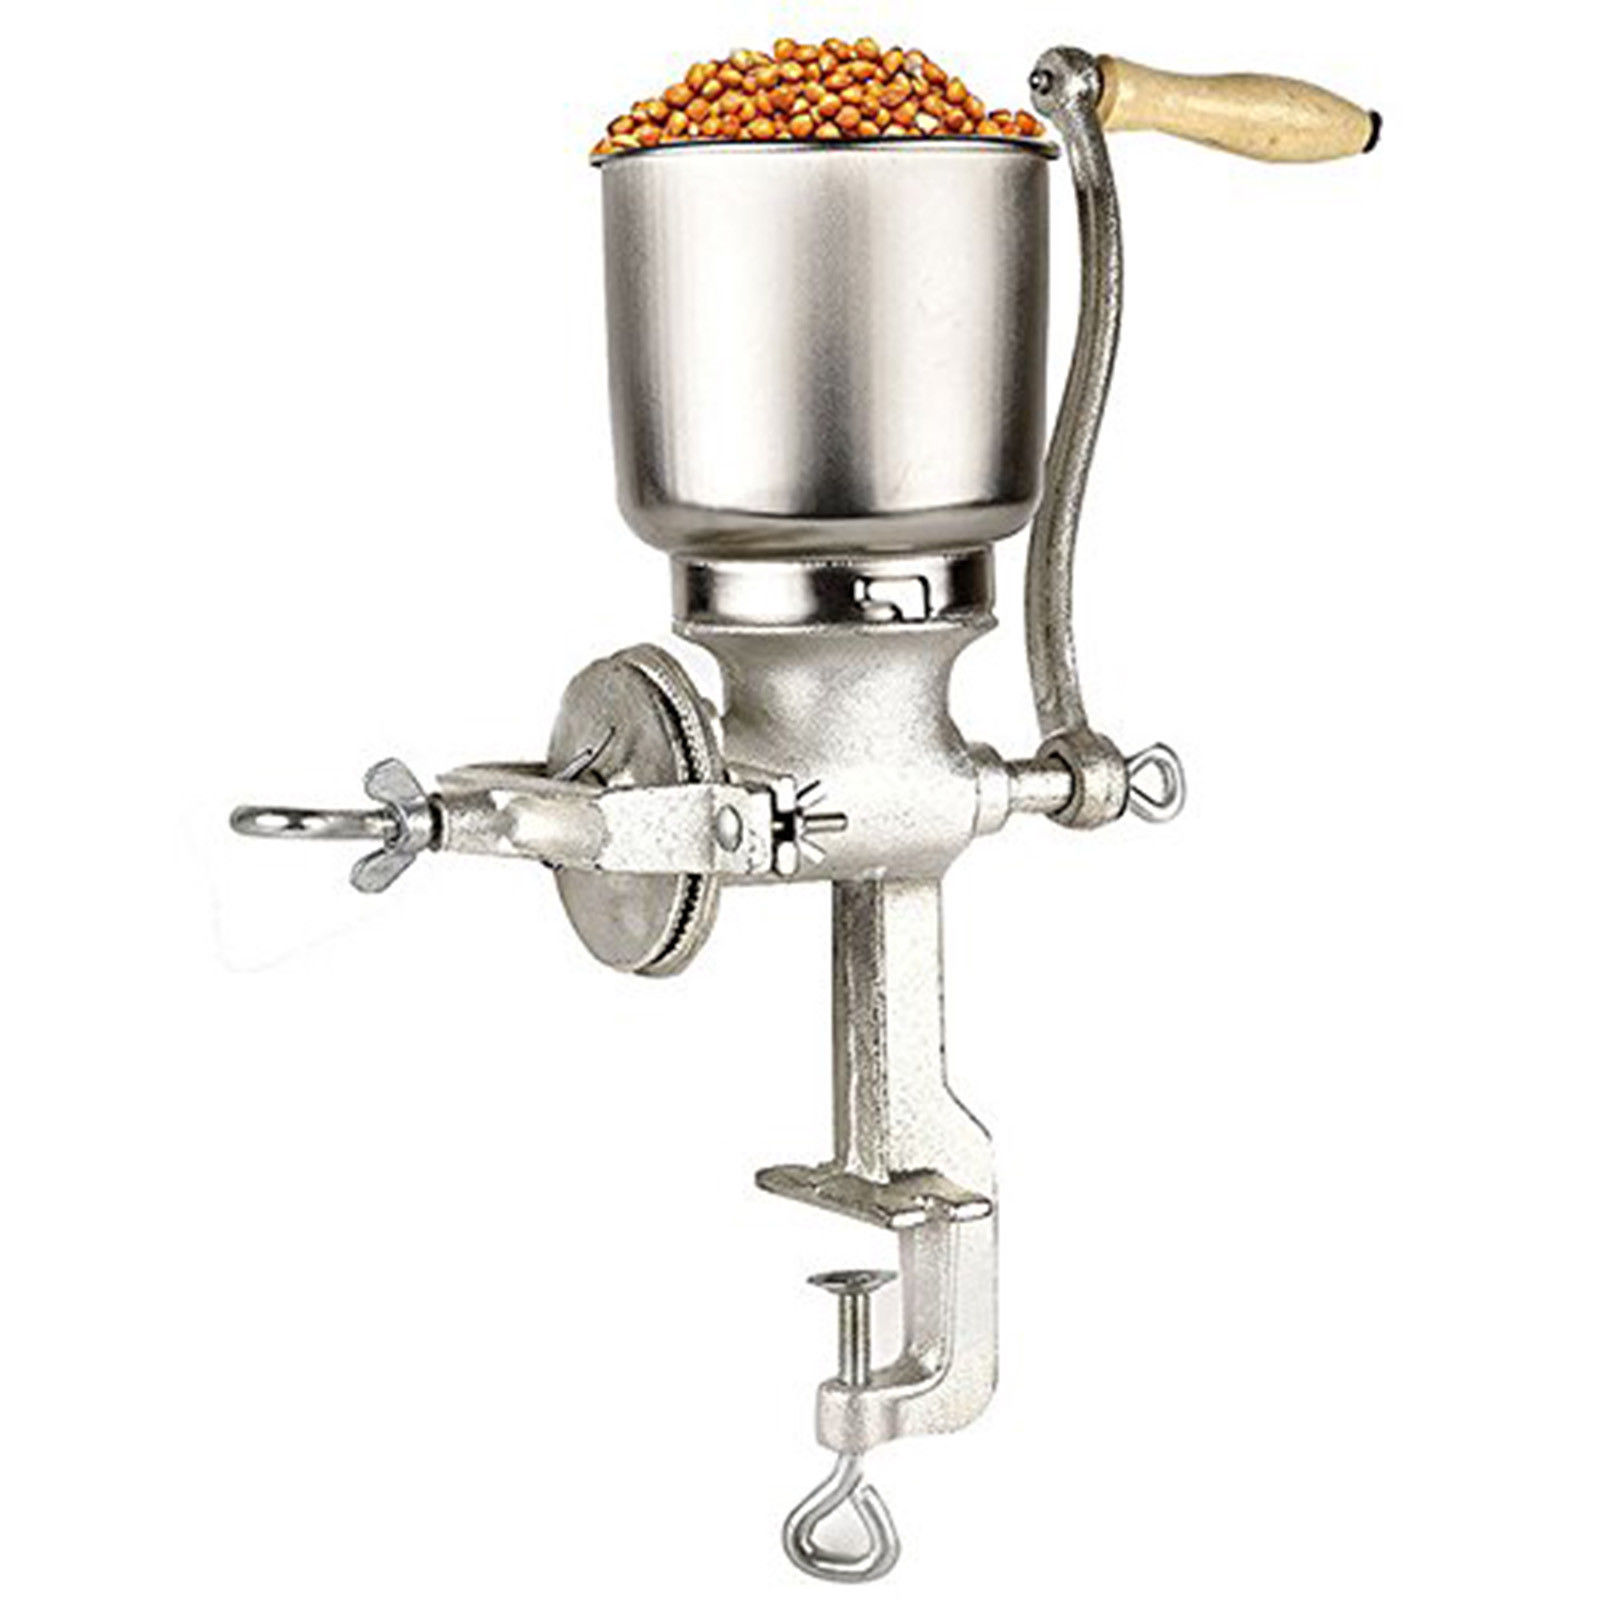 Manual Hand Grain Corn Cereal Flour Mill with Hopper Wheat Coffee Rice Grinder